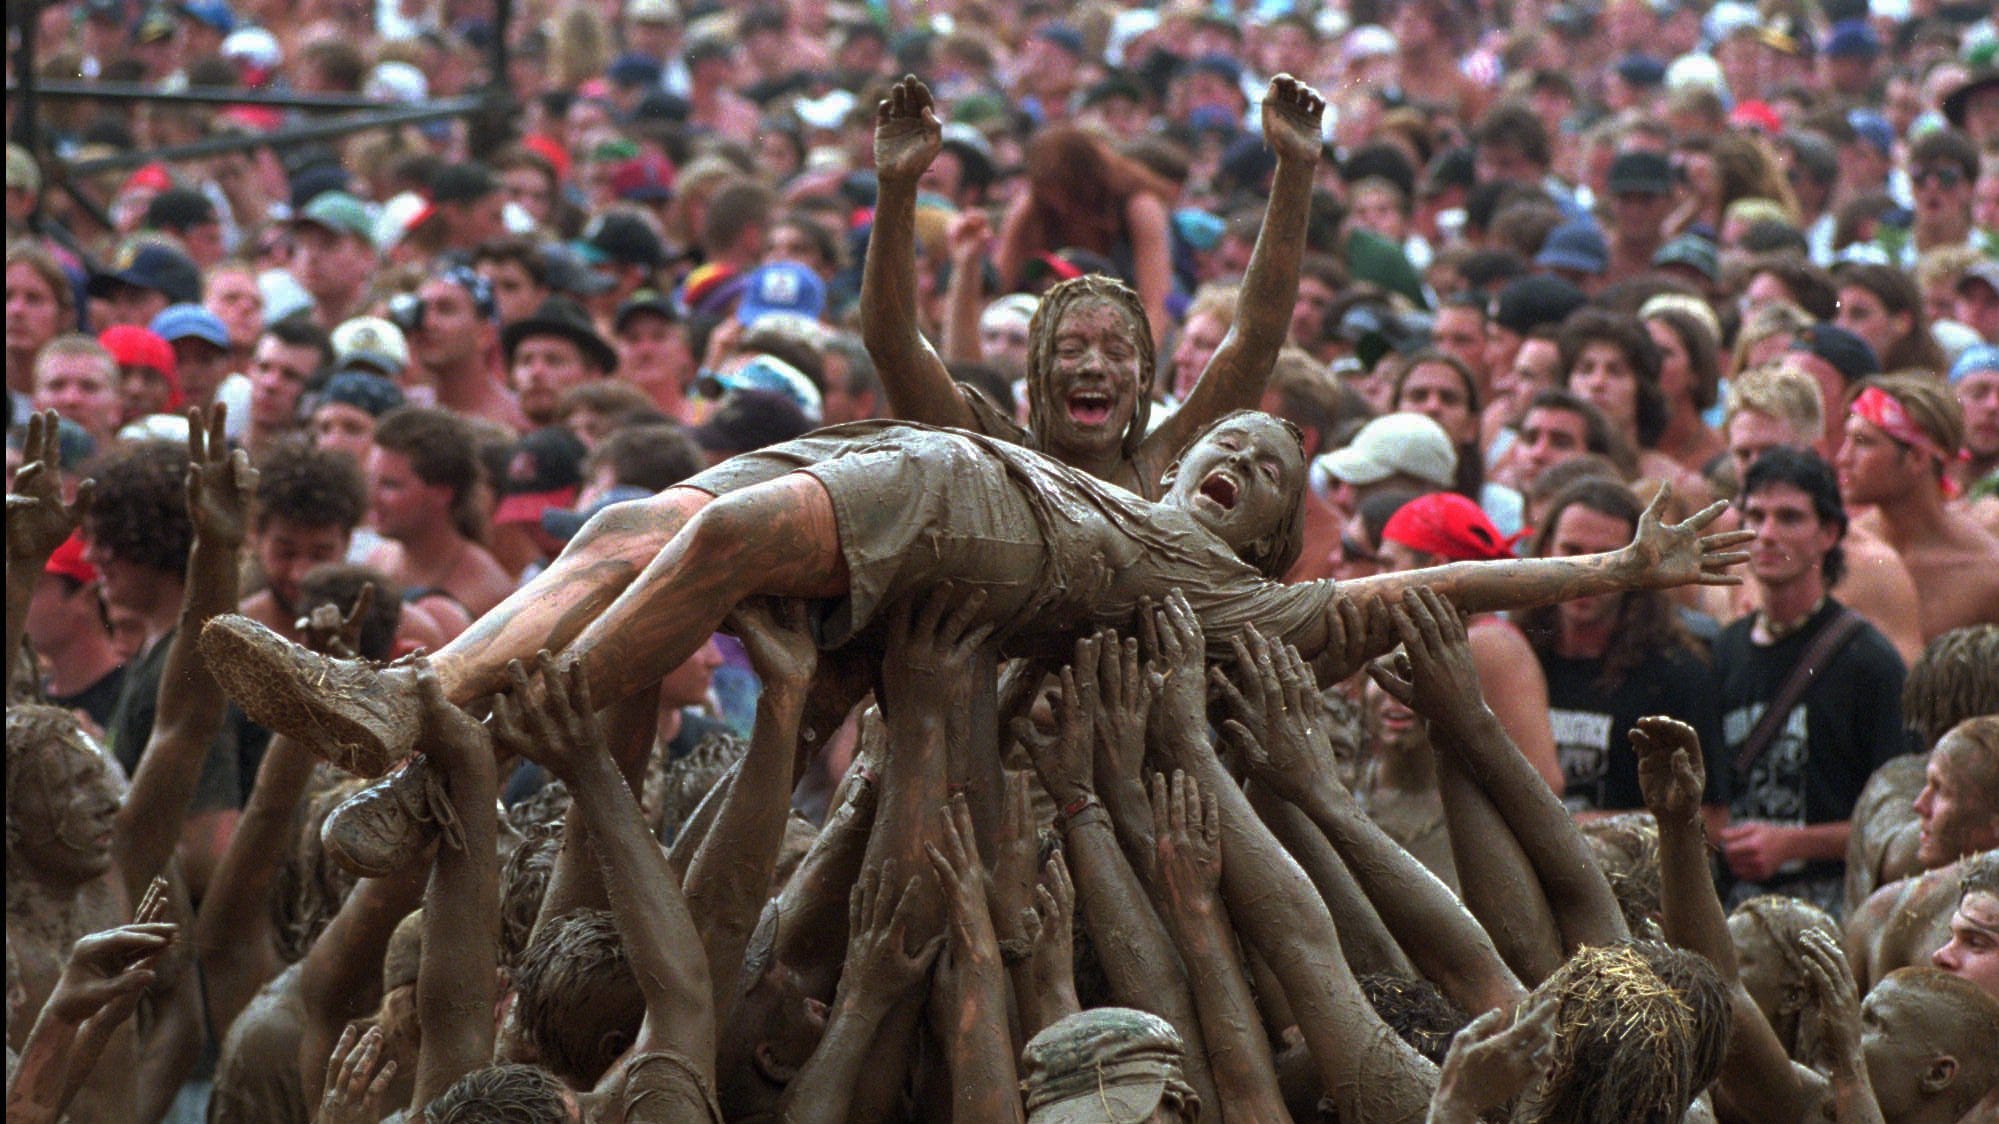 It's the 25th anniversary of Woodstock '94 – and I was there